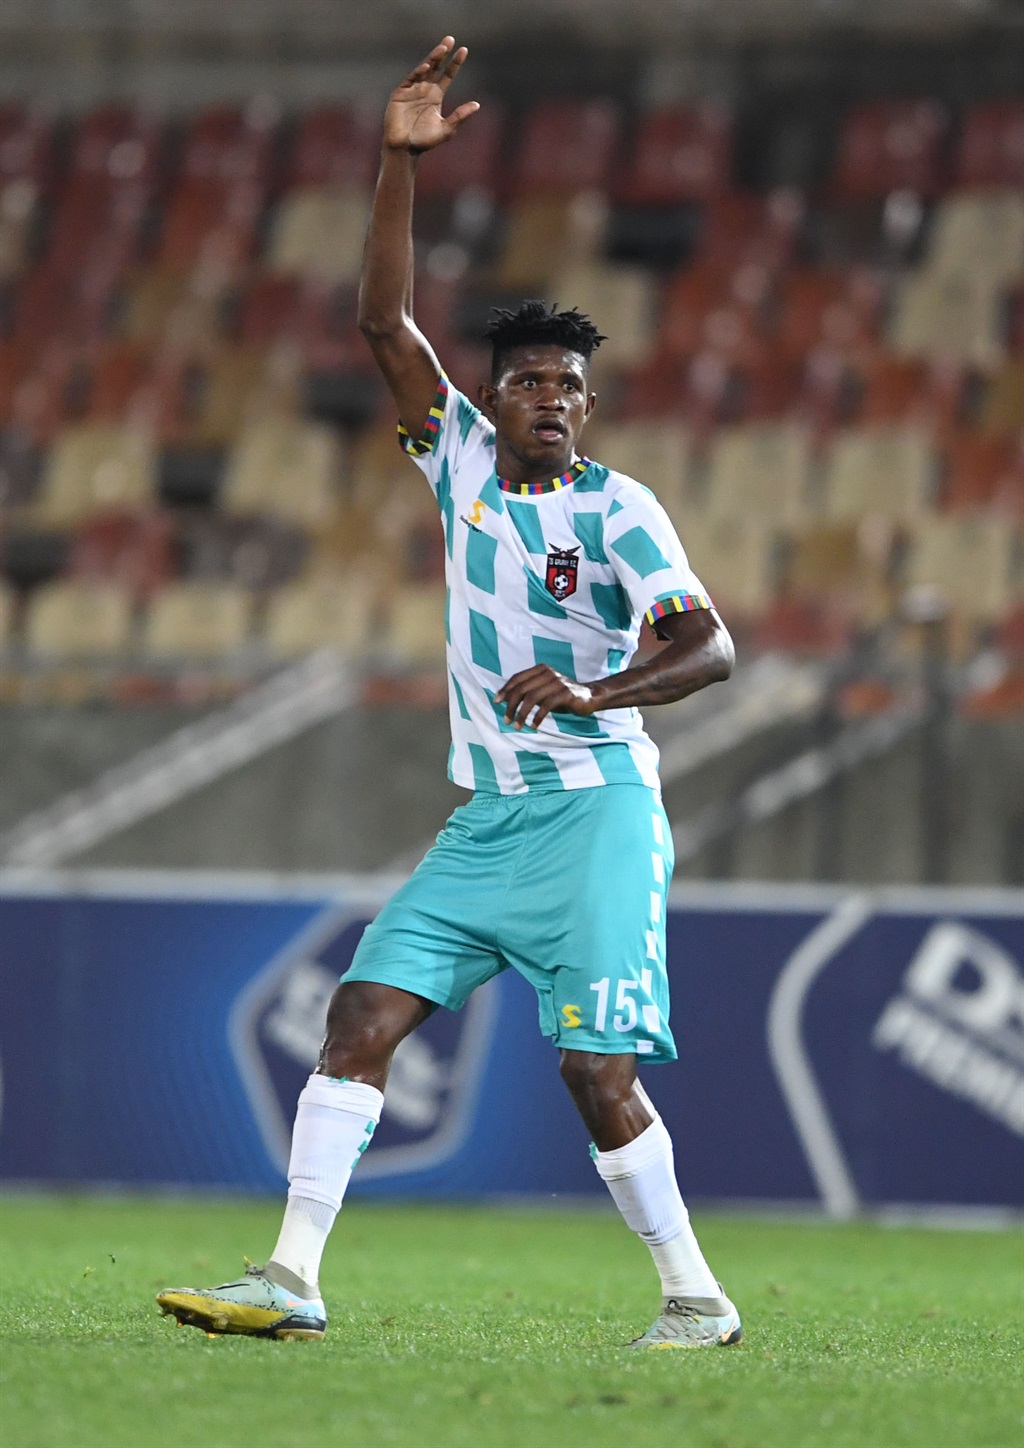 POLOKWANE, SOUTH AFRICA - MAY 03: Bathusi Aubaas of TS Galaxy during the DStv Premiership match between Sekhukhune United and TS Galaxy at Peter Mokaba Stadium on May 03, 2023 in Polokwane, South Africa. (Photo by Philip Maeta/Gallo Images)